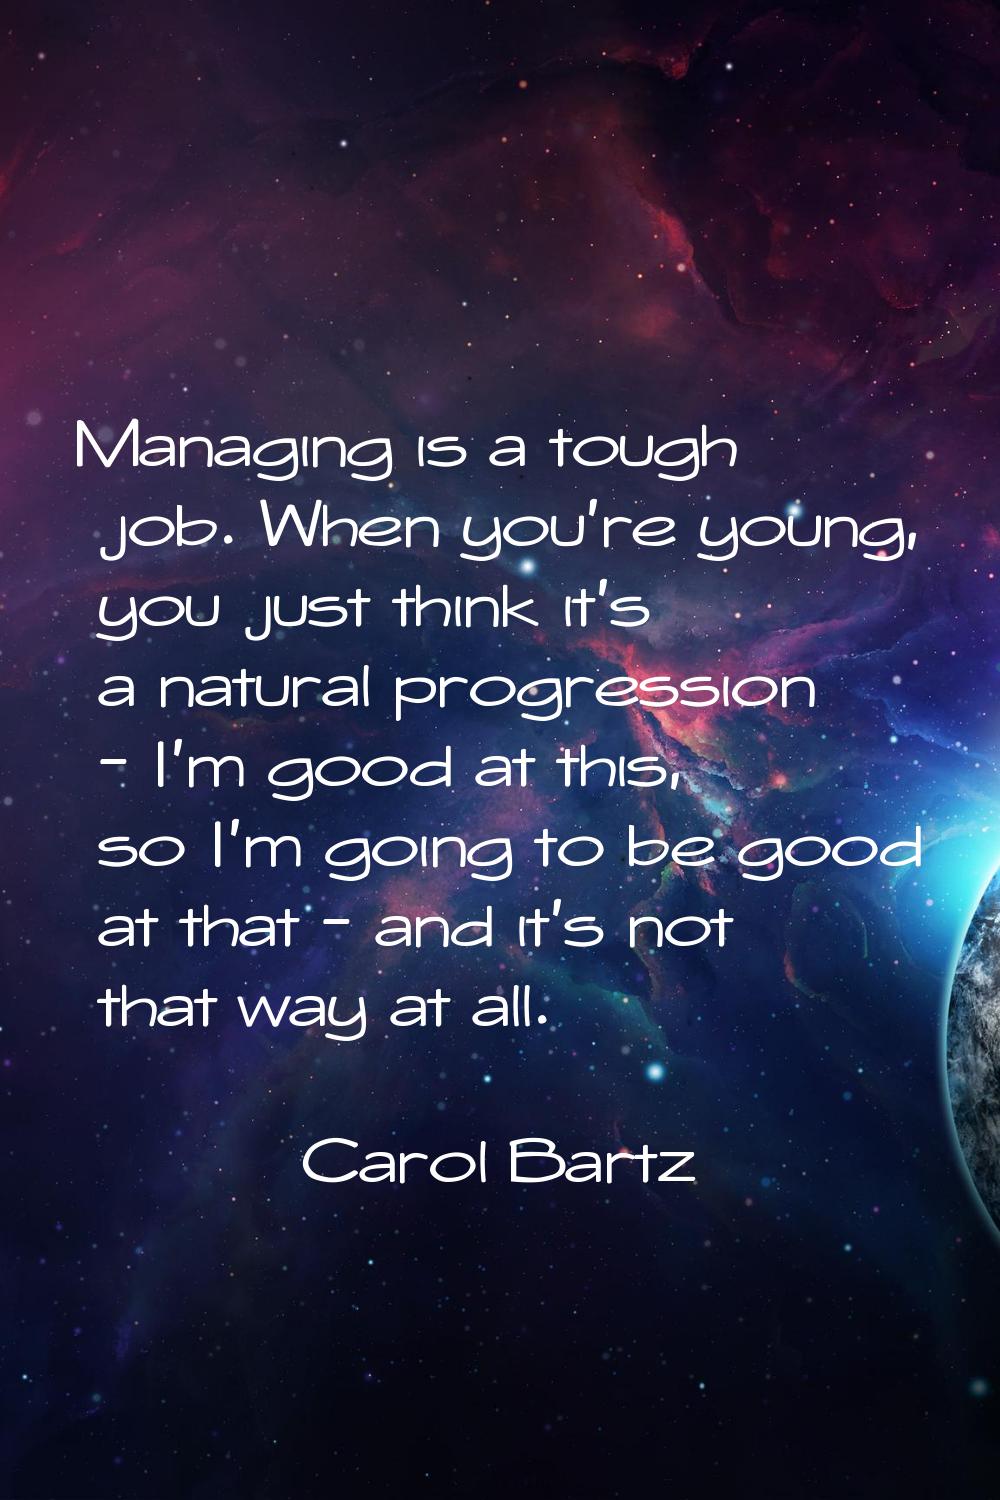 Managing is a tough job. When you're young, you just think it's a natural progression - I'm good at